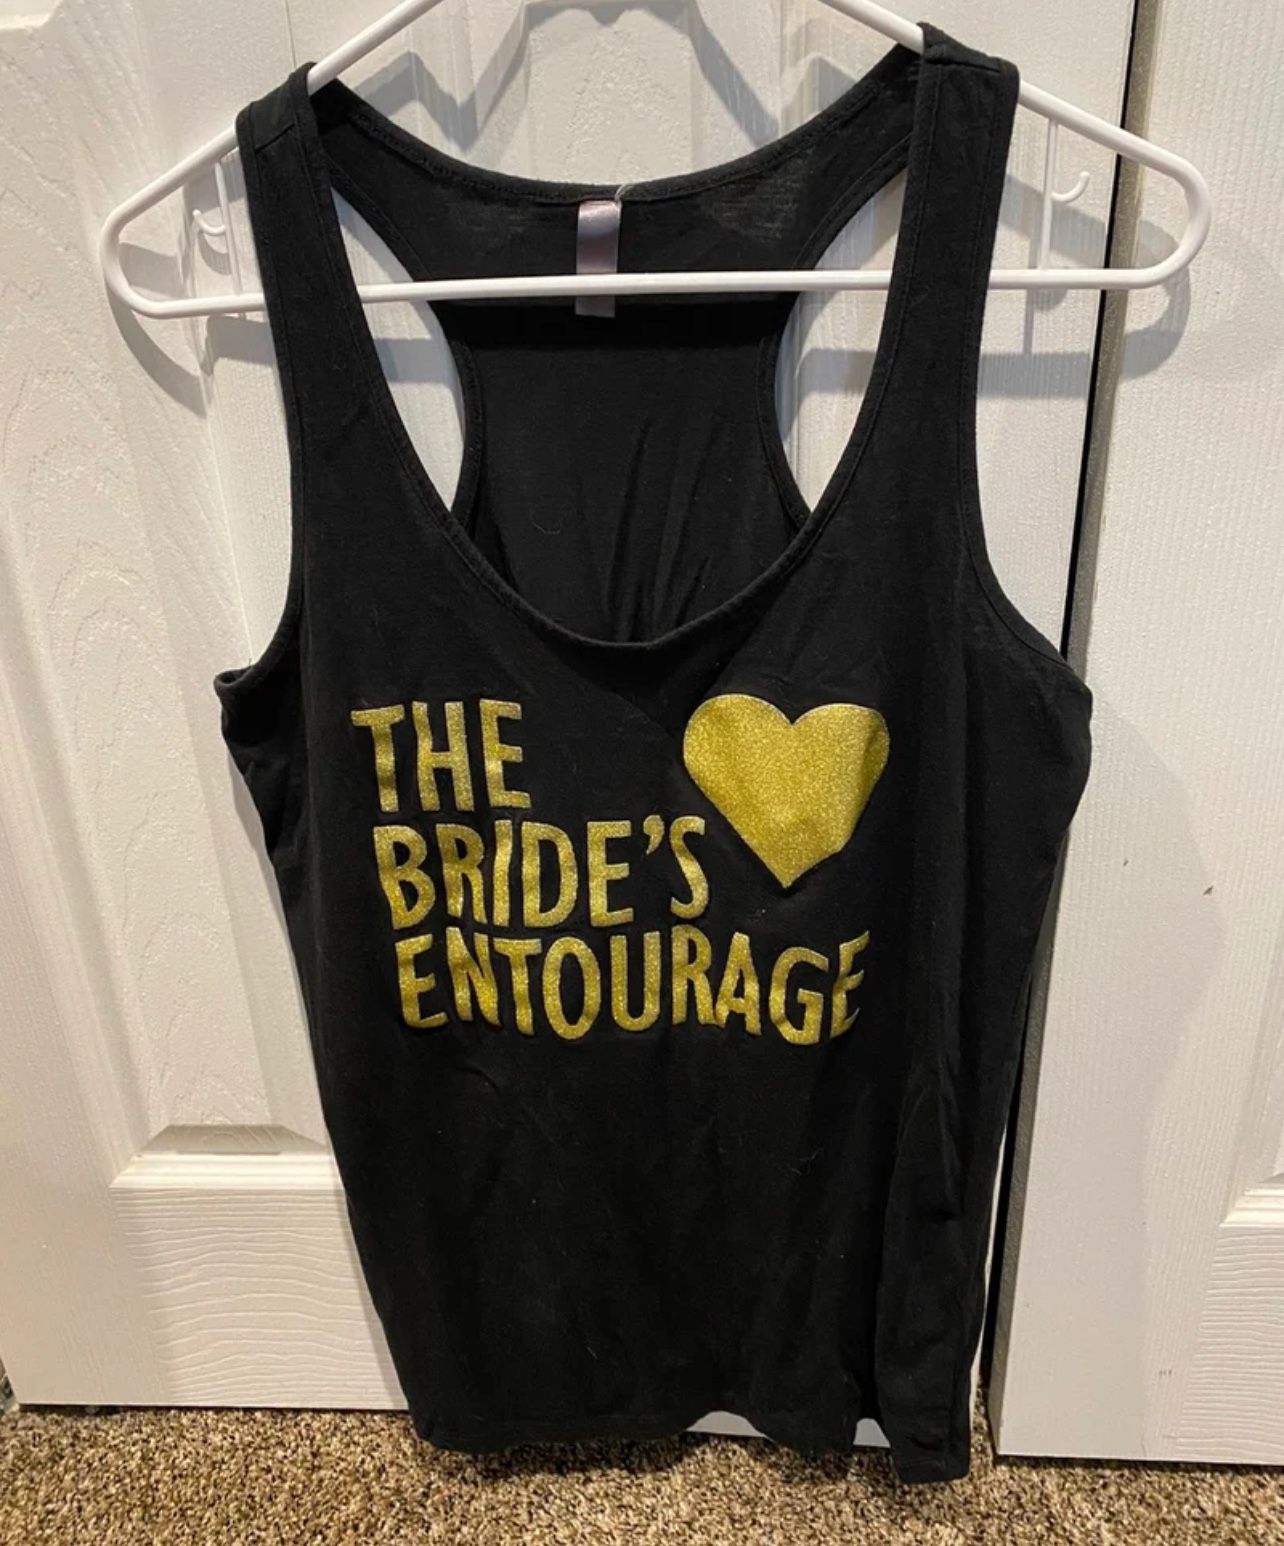 The Bride’s Entourage Tank top in size XL  Black with gold writing  